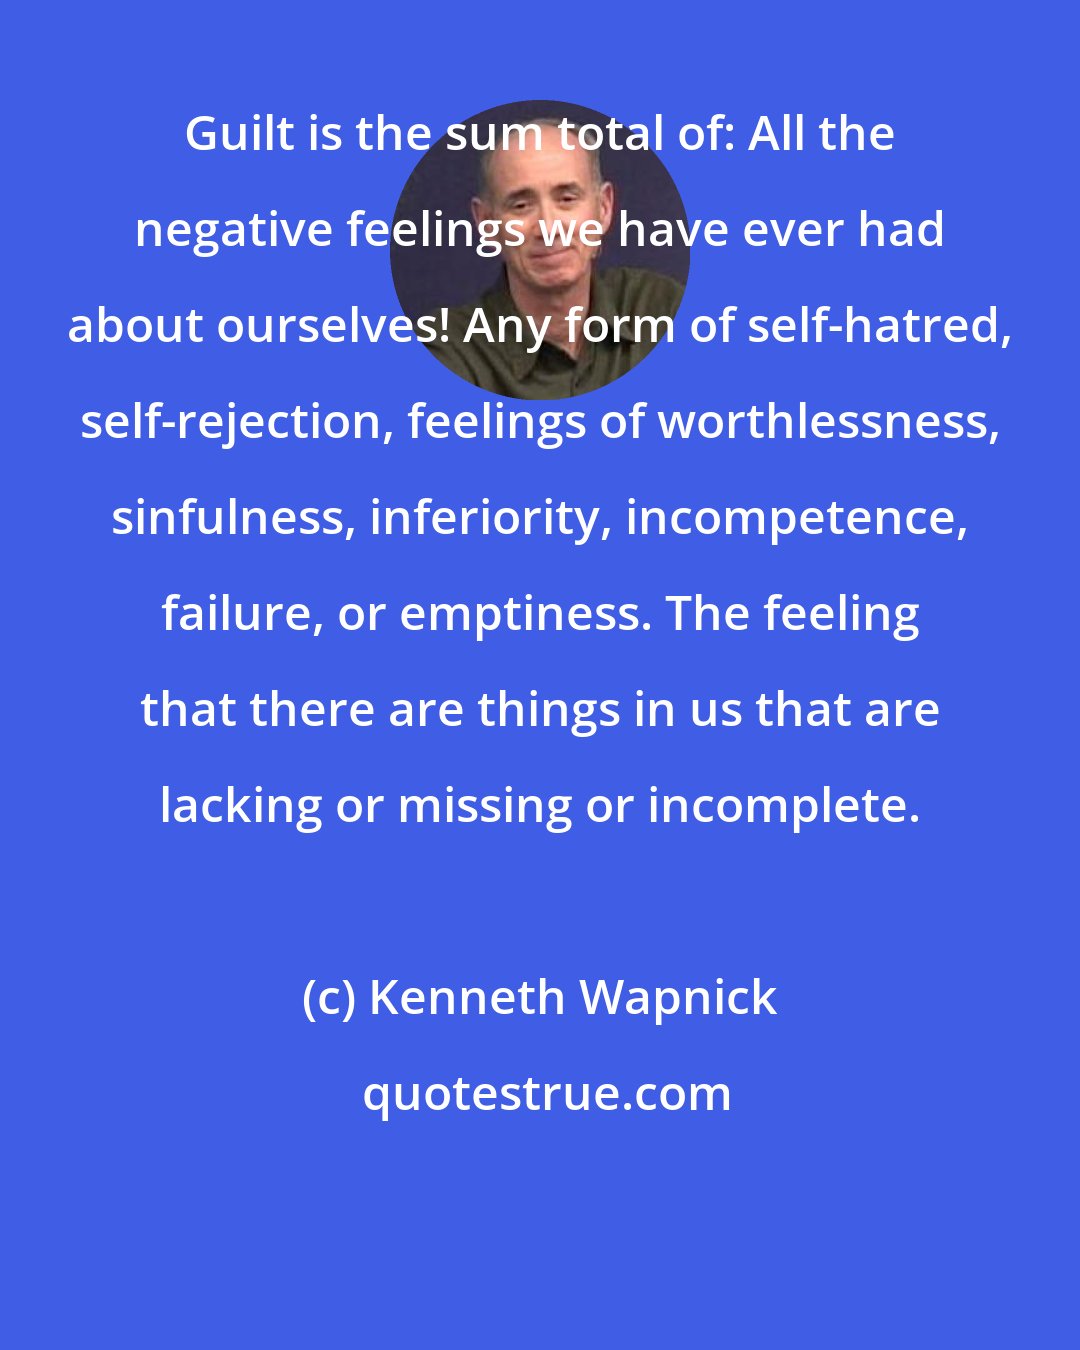 Kenneth Wapnick: Guilt is the sum total of: All the negative feelings we have ever had about ourselves! Any form of self-hatred, self-rejection, feelings of worthlessness, sinfulness, inferiority, incompetence, failure, or emptiness. The feeling that there are things in us that are lacking or missing or incomplete.